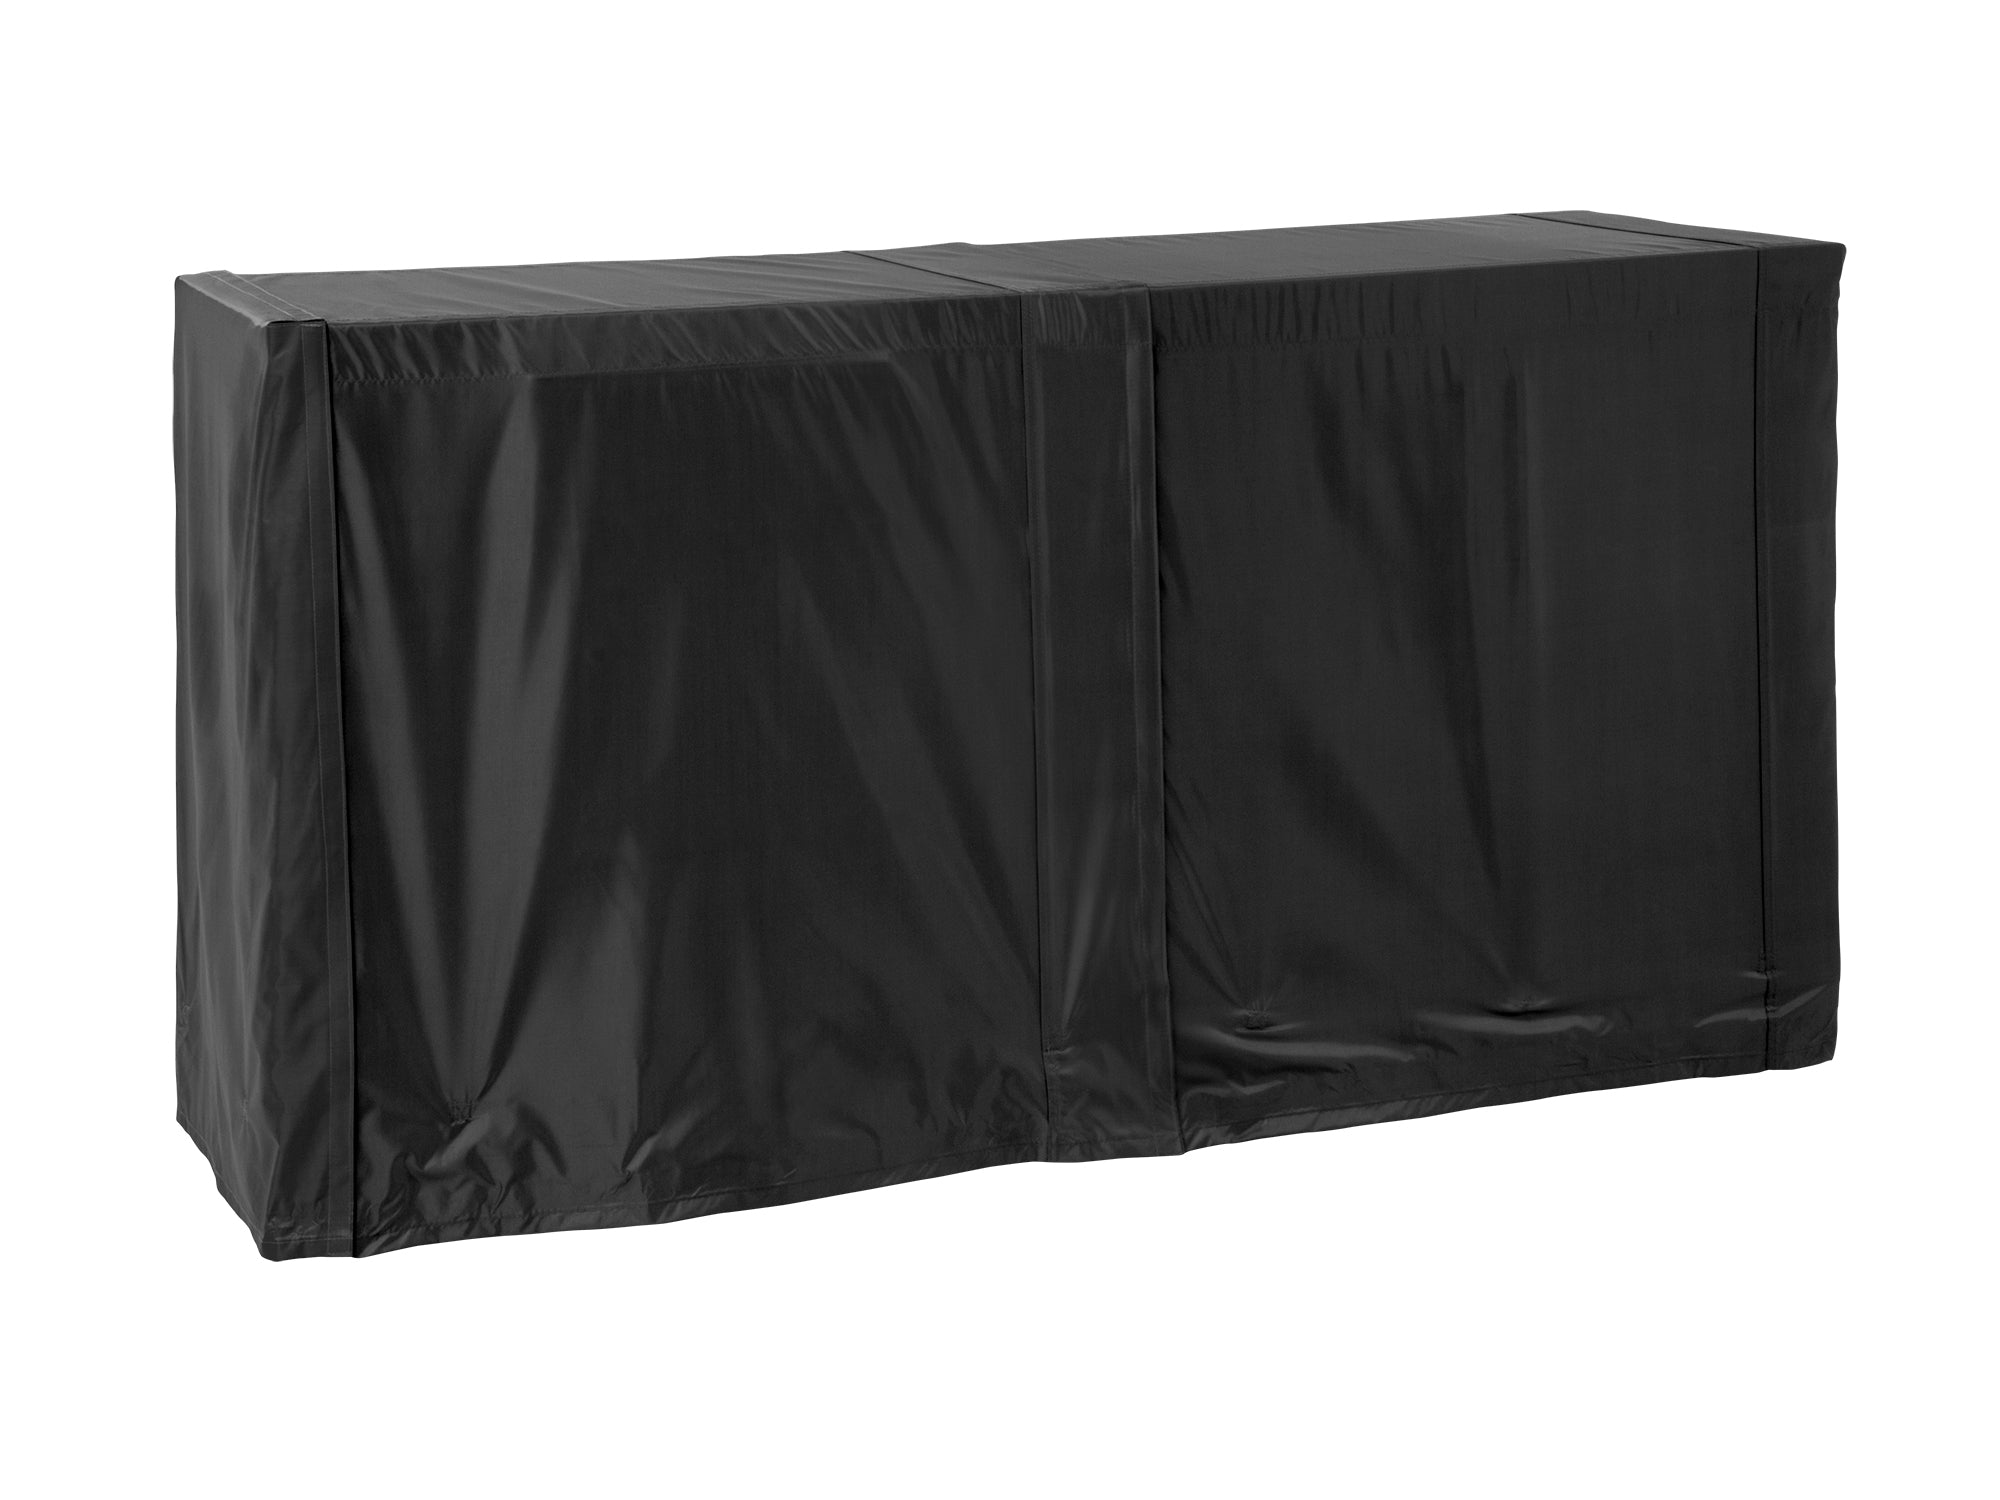 Outdoor Kitchen All-Season Cover Bundle: 96 in. Cover, Prep Table Cover, Right/Left Side Panel Covers